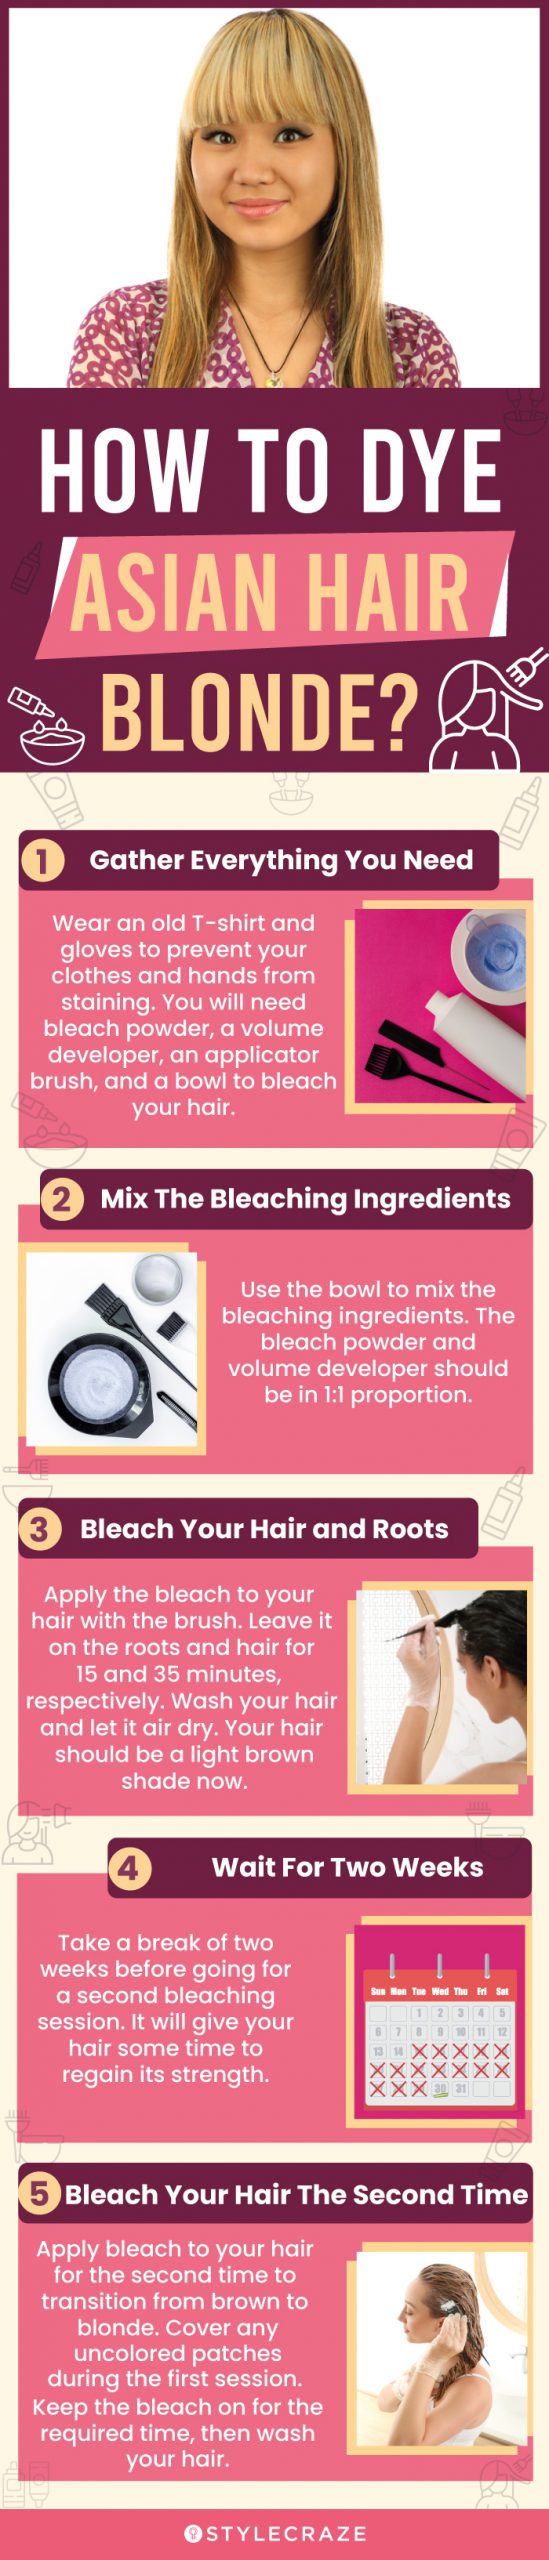 how to dye asian hair blonde (infographic)